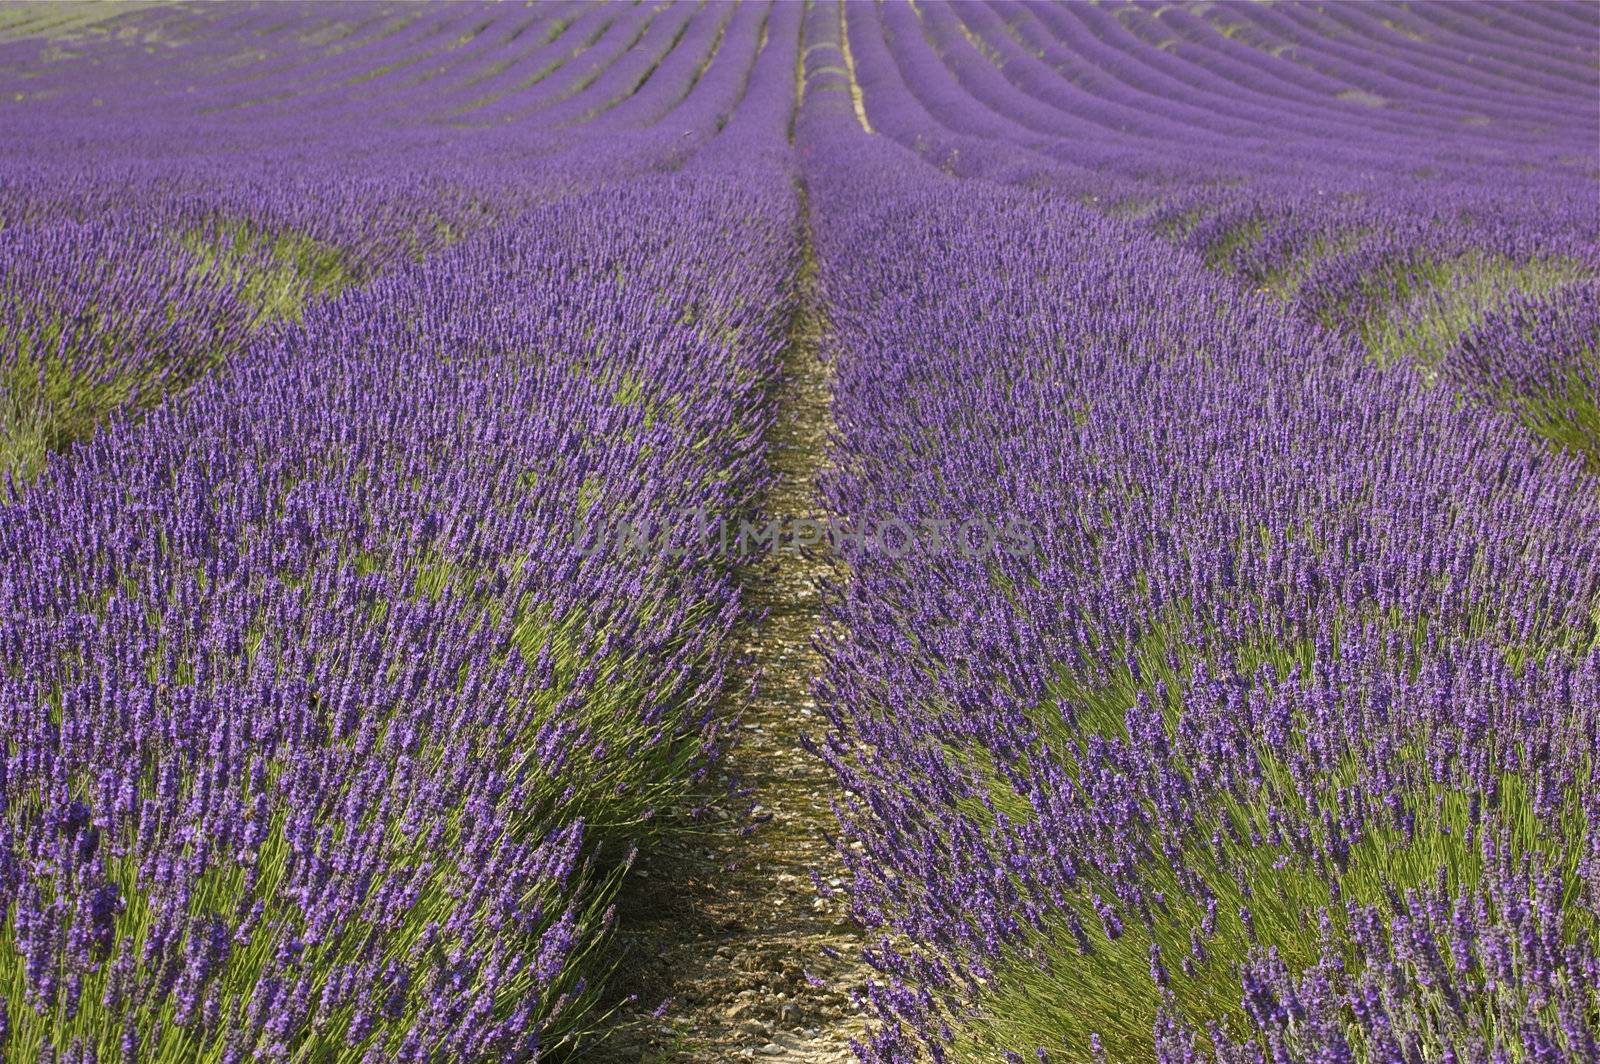 Rows of purple blossoming lavender with green stalks leading up a hill.